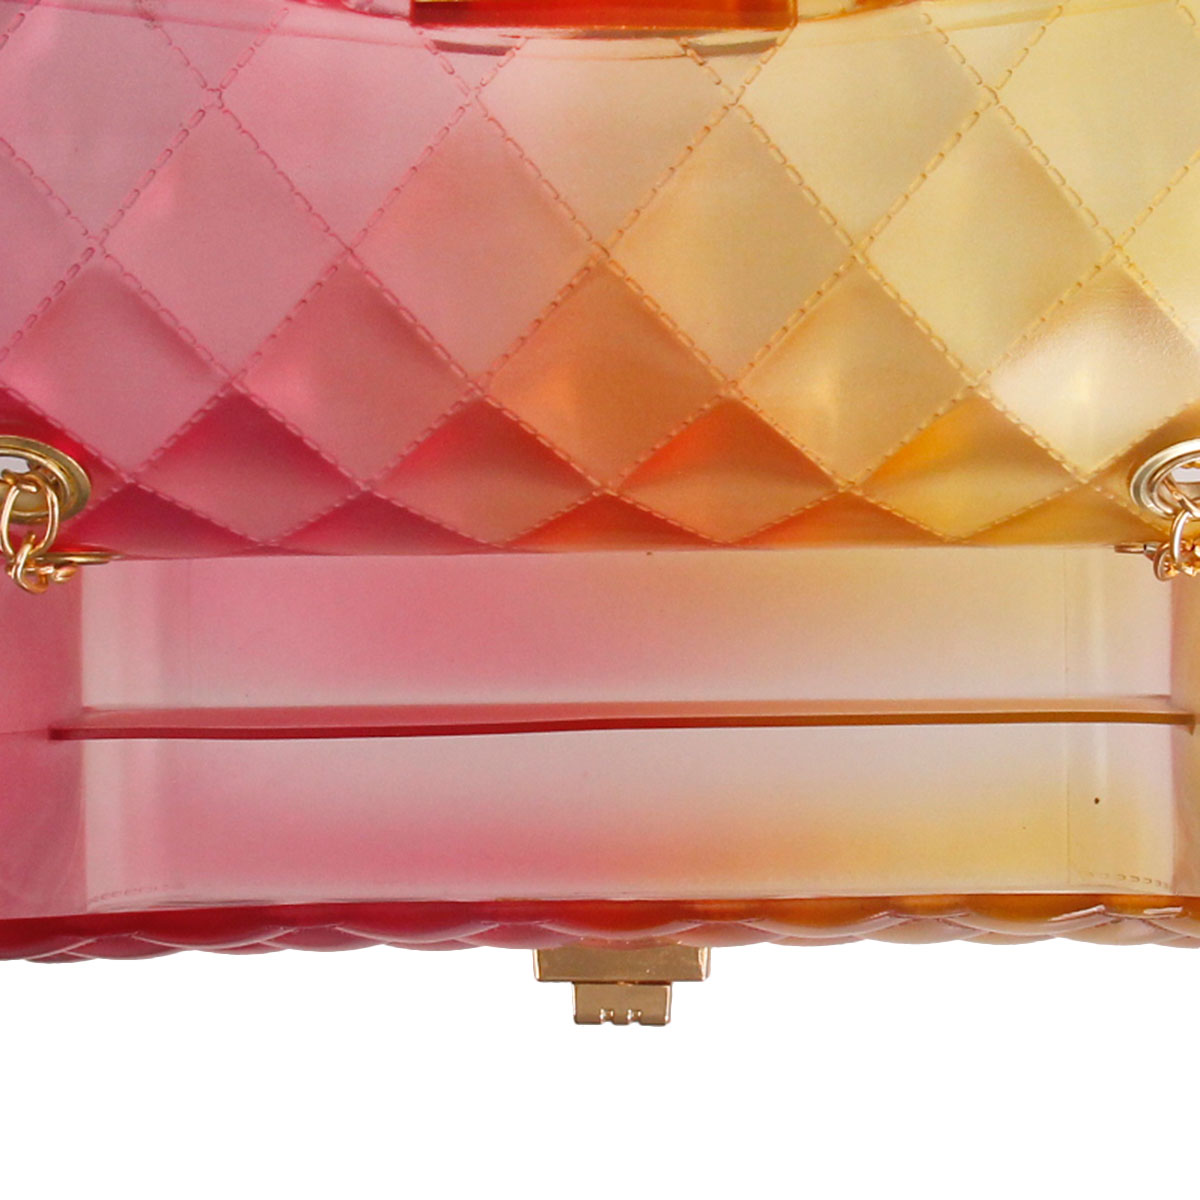 Yellow Pink Quilted Flap Mini Jelly Bag